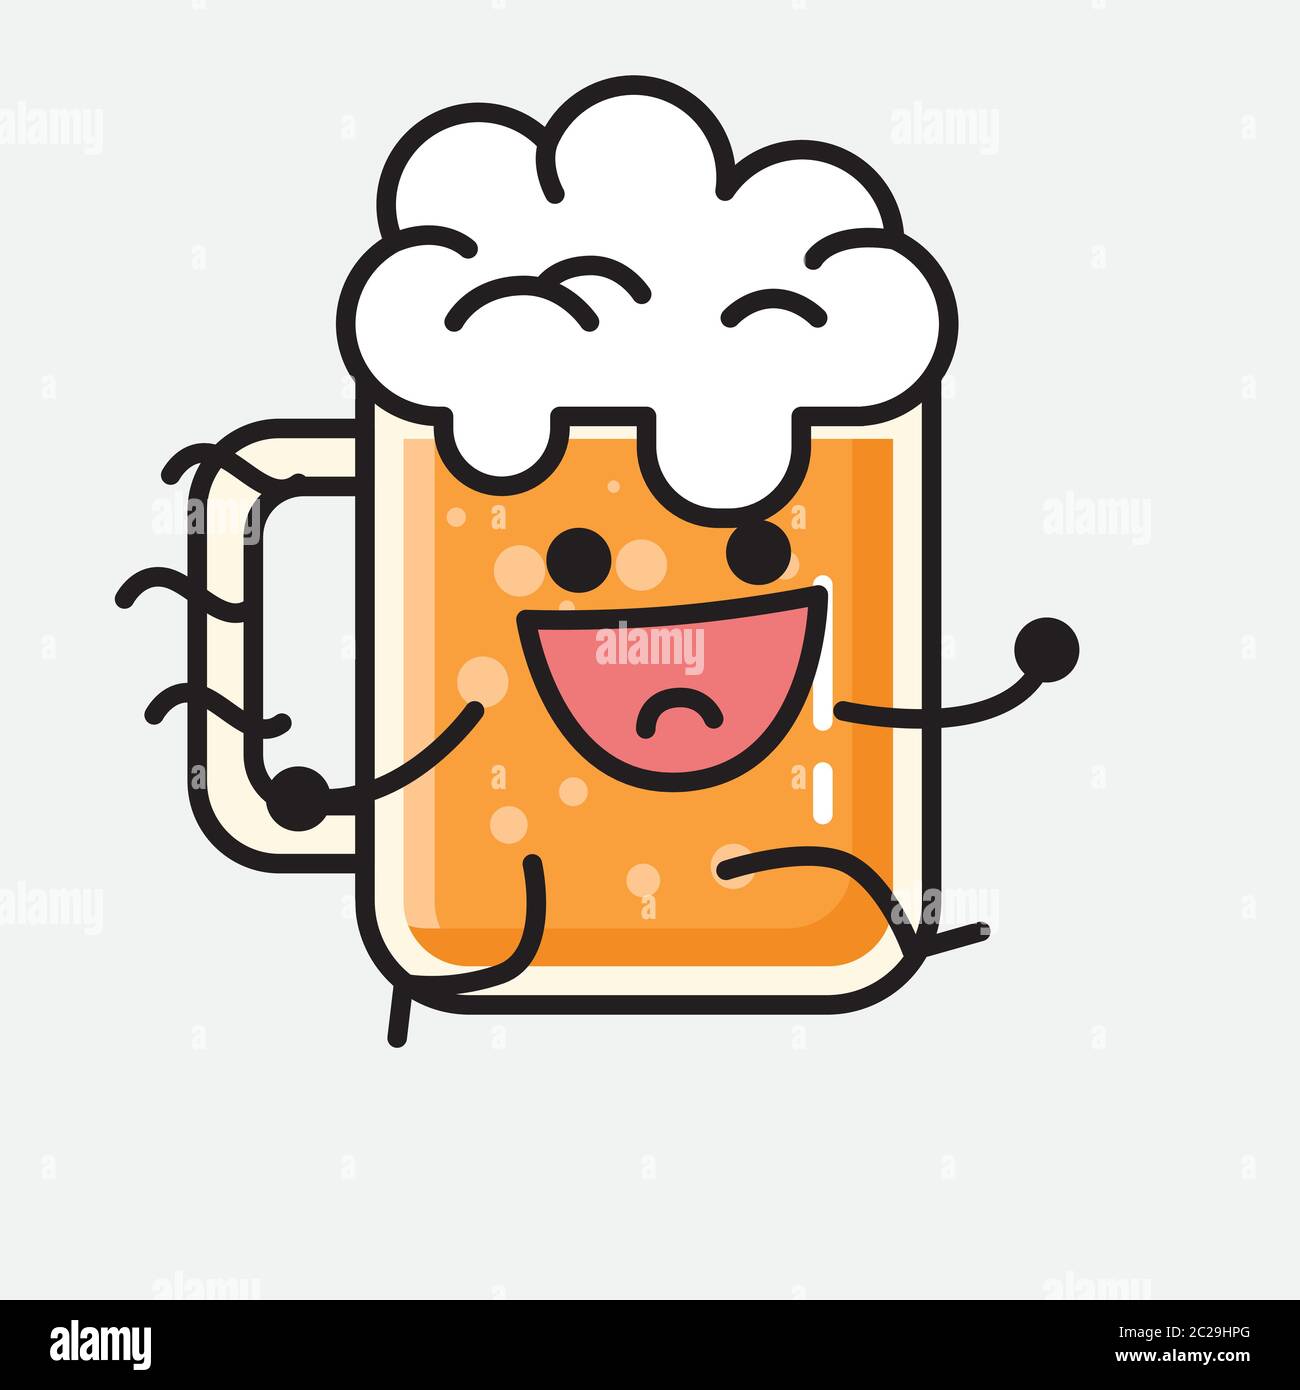 An illustration of Cute Beer Mascot Vector Character in Flat Design ...